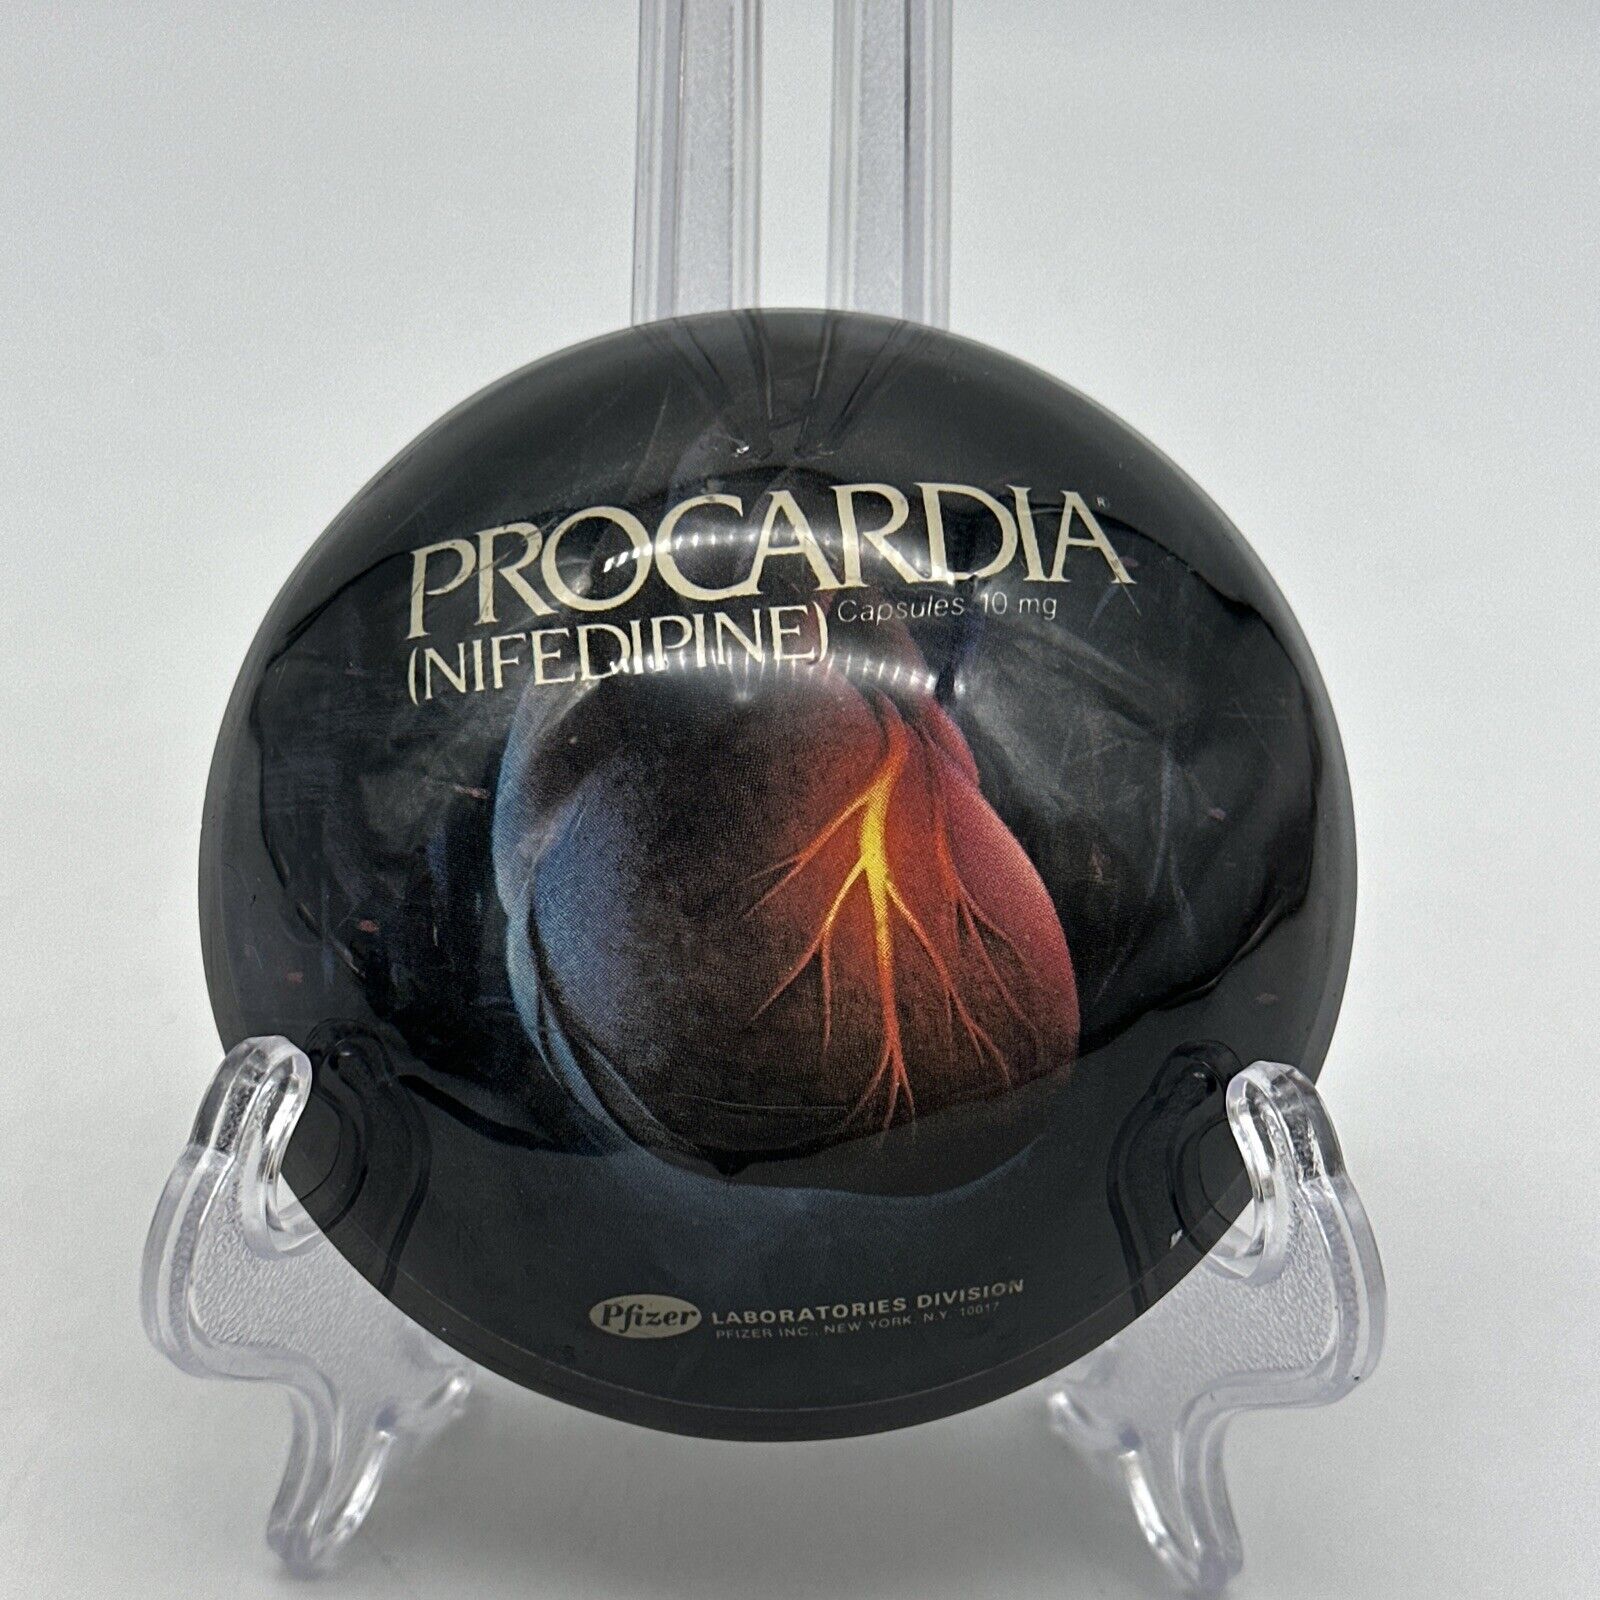 Procardia Nifedipine Pharmacy advertising Paperweight: Dome 3\